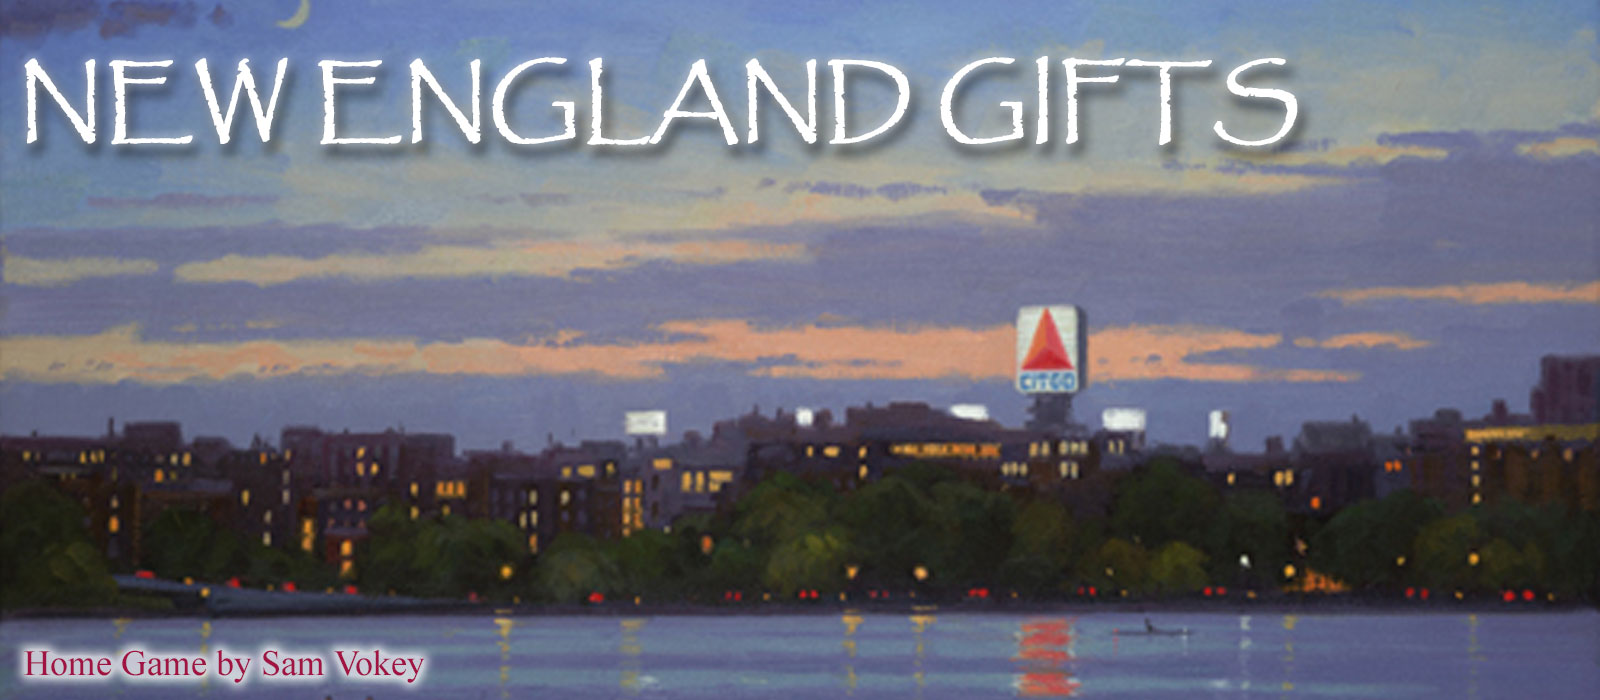 Massachusetts Bay Trading Co -- Gifts from New England